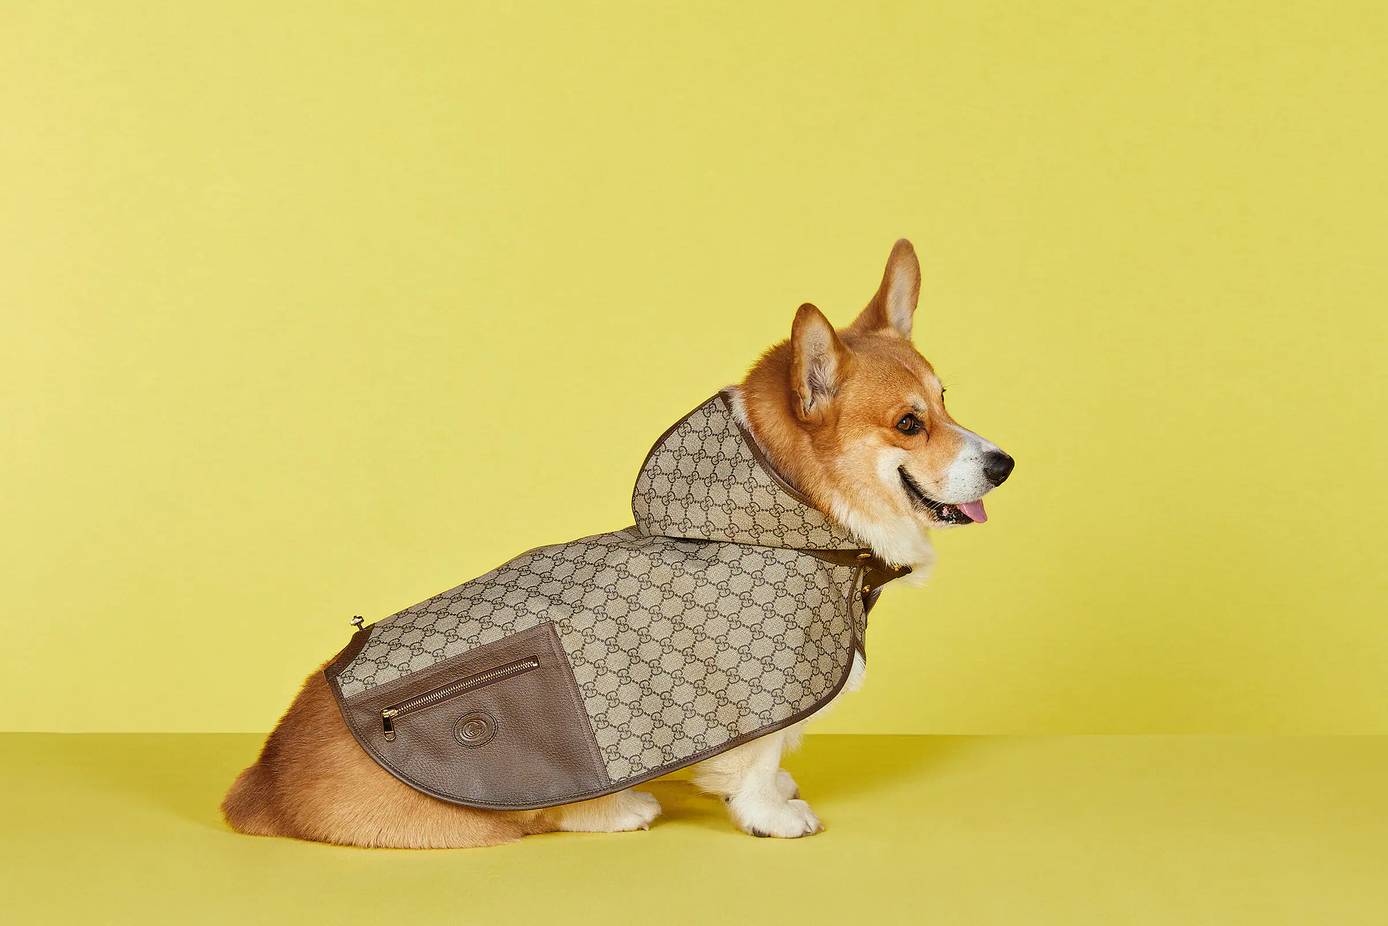 Tail-blazers: fashion houses turn to pet clothing as 'humanisation' trend  grows, Fashion